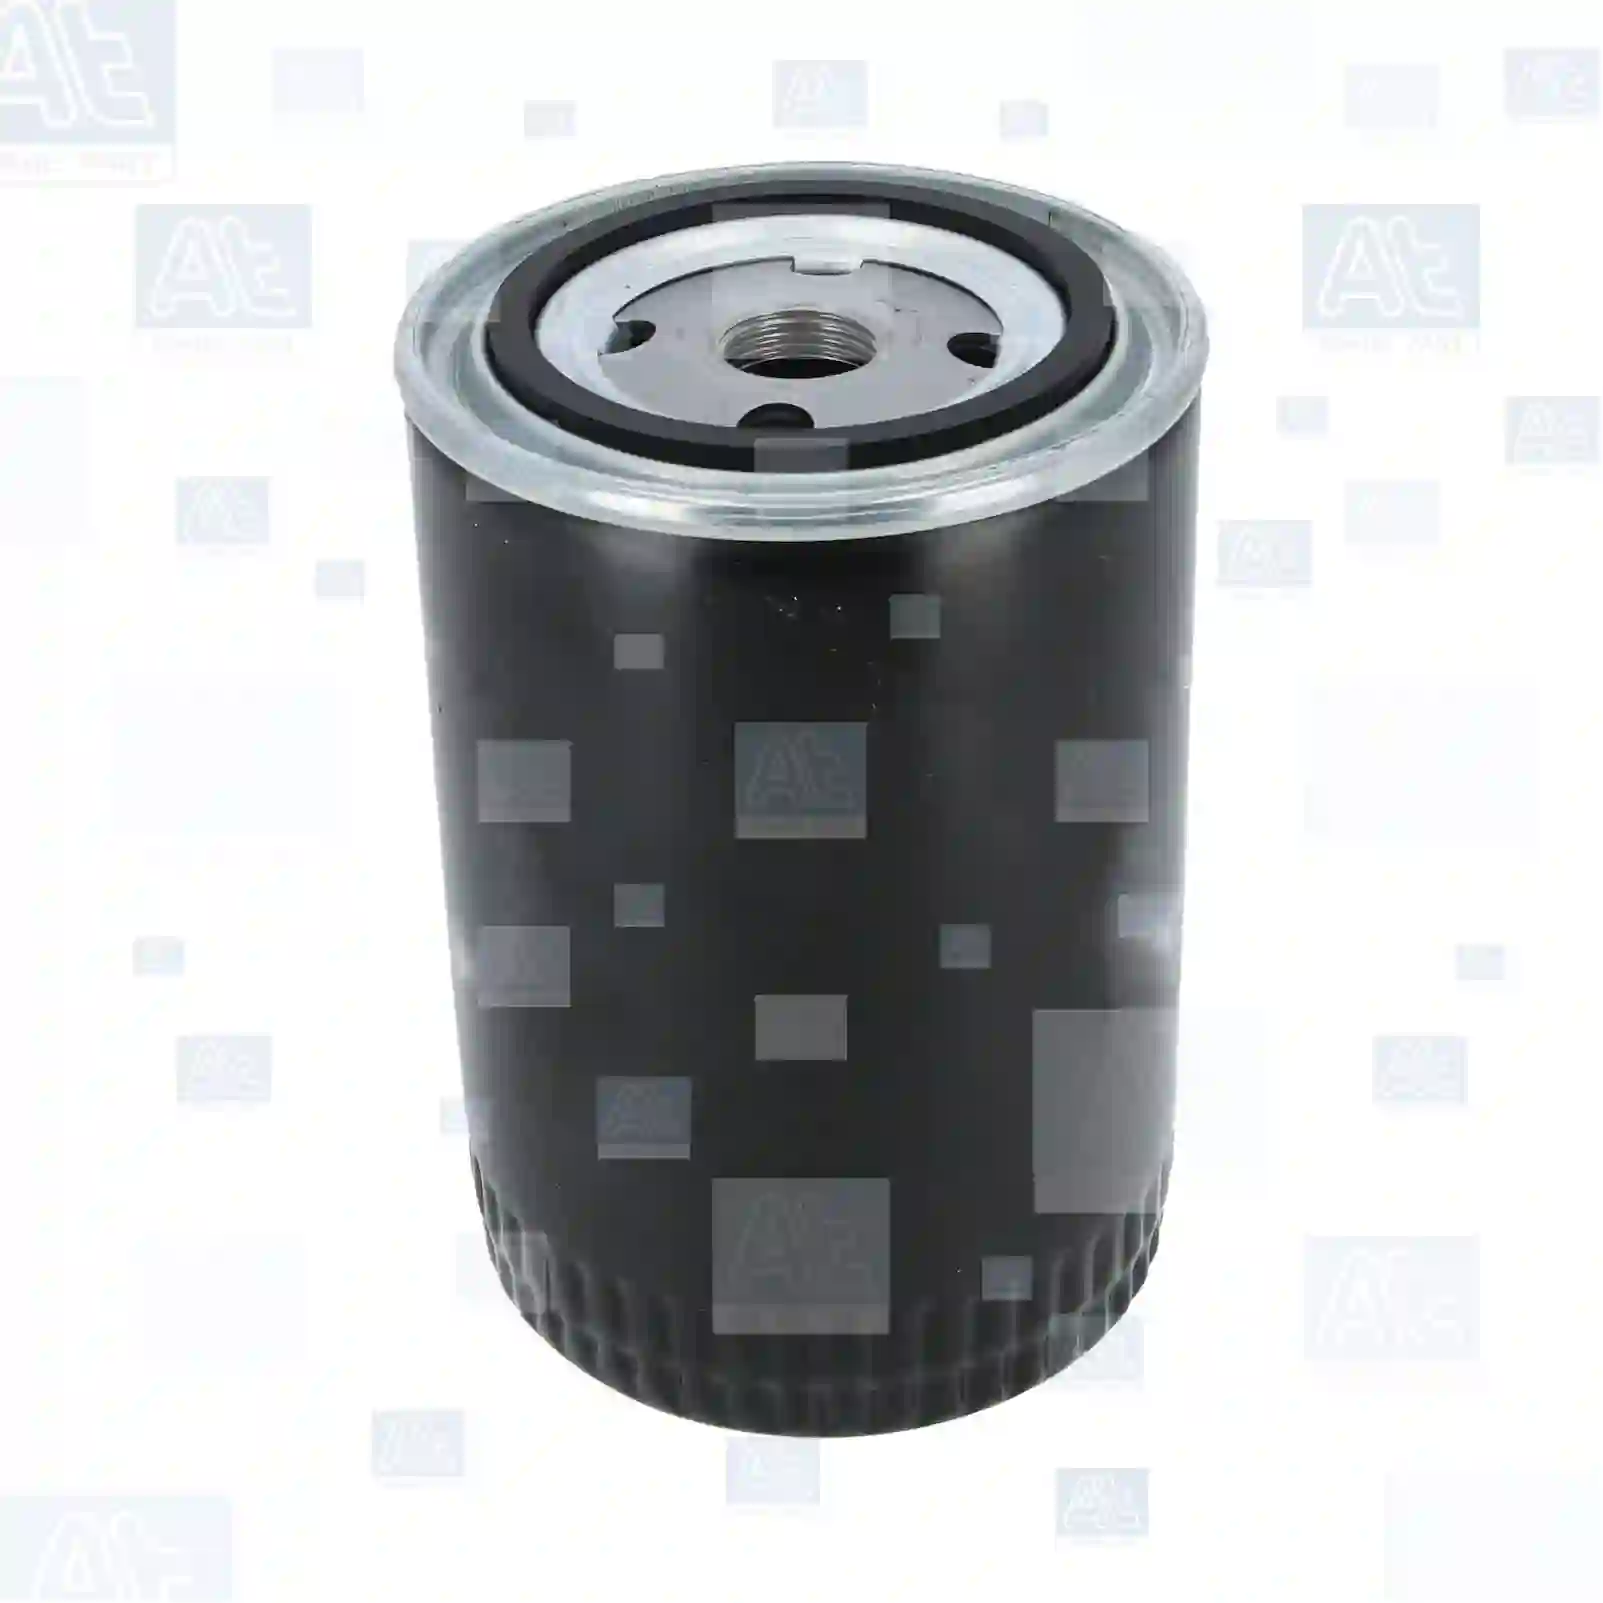 Oil Filter Oil filter, at no: 77700604 ,  oem no:00592602, 105000603000, 37064000, 451700000, 068115561, 068115561B, 068115561C, 7984460, 93156363, 1109A7, 1109F1, 1109G9, 1109K5, 1109V3, 24119014A, 1500932, 1560041010, 42511834, F238202310110, 01354823, 01930328, 01930329, 01930766, 04119015, 05926021, 62703506, 72370000, 1037150, 1318700, 1318701, 1495704, 1498028, 1523494, 1794466, 3917694, 5003232, 5012554, 5012580, 5013148, 9613327, DNP557780, 5574459, 5575840, 5579970, 6435675, 6436749, 6438121, 7984460, 7984655, 7984844, 7984870, 93156304, 93156363, 93156390, 93156952, 9830607, 9975153, 25011243, 7984303, 7984460, 7984844, 93156363, 9975243, 0009830624, 15461-551-305, 15461-551-315, 01164626, 01174416, 244191501, 82220425, 82232108, 82241613, 485GB1138, 0021844001, 15208-43G00, 15208-65001, 15208-65002, 15208-65010, 15208-65011, 15208-65012, 15208-65014, 15208-65016, 15208-65210, 15208-65601, 15208-G4300, 15208-G9903, 15208-V4960, 15208-W1120, 15208-W1123, 15208-W3401, 15208-Y9700, A5208-W3403, 3448991, 3448992, 603362, 603372, 7984229, 7984655, 1109A7, 1109F1, 1109G9, 1109K5, 1109V3, 90110720301, 90110720302, 90110720305, 90110720309, 90110720322, 0000314914, 0005151017, 0024151017, 0770102280, 5000040870, 5000044064, 5000044499, 5000044959, 6005019754, 7701006374, 554329, 555329, A37189, BFF6535, BFF65353, ERC1444, GFE116, 244191300, 244191500, 068115561B, 15208-32225, 15208-32255, 15208-7F400, 15600-40010, 15600-41020, 15600-44010, 15600-50010, 15601-30010, 15601-41010, 15601-42020, 15601-44011, 16500-41020, 120190212001, 15205W1120, 1520805001, 1520805D00, 1520805D01, 1520843G00, 1520843G0A, 1520865000, 1520865004, 1520865005, 1520865011, 1520865012, 1520865014, 1520865016, 152087F400, 152087T400, 15208W1115, 15208W1120, 15208W1120B, 15208W1123, 15208W3403, 92287Q7332, BF20805D02, FL20805D01, 1257492, 12574927, 1328126, 13281611, 4804651, 4840740, 705097, 008115561, 028115561B, 028115561E, 068115561, 068115561A, 068115561B, 068115561C, 068115561E, 068115561G, 068115568B, 078115561E, 168115561A, 681155613 At Spare Part | Engine, Accelerator Pedal, Camshaft, Connecting Rod, Crankcase, Crankshaft, Cylinder Head, Engine Suspension Mountings, Exhaust Manifold, Exhaust Gas Recirculation, Filter Kits, Flywheel Housing, General Overhaul Kits, Engine, Intake Manifold, Oil Cleaner, Oil Cooler, Oil Filter, Oil Pump, Oil Sump, Piston & Liner, Sensor & Switch, Timing Case, Turbocharger, Cooling System, Belt Tensioner, Coolant Filter, Coolant Pipe, Corrosion Prevention Agent, Drive, Expansion Tank, Fan, Intercooler, Monitors & Gauges, Radiator, Thermostat, V-Belt / Timing belt, Water Pump, Fuel System, Electronical Injector Unit, Feed Pump, Fuel Filter, cpl., Fuel Gauge Sender,  Fuel Line, Fuel Pump, Fuel Tank, Injection Line Kit, Injection Pump, Exhaust System, Clutch & Pedal, Gearbox, Propeller Shaft, Axles, Brake System, Hubs & Wheels, Suspension, Leaf Spring, Universal Parts / Accessories, Steering, Electrical System, Cabin